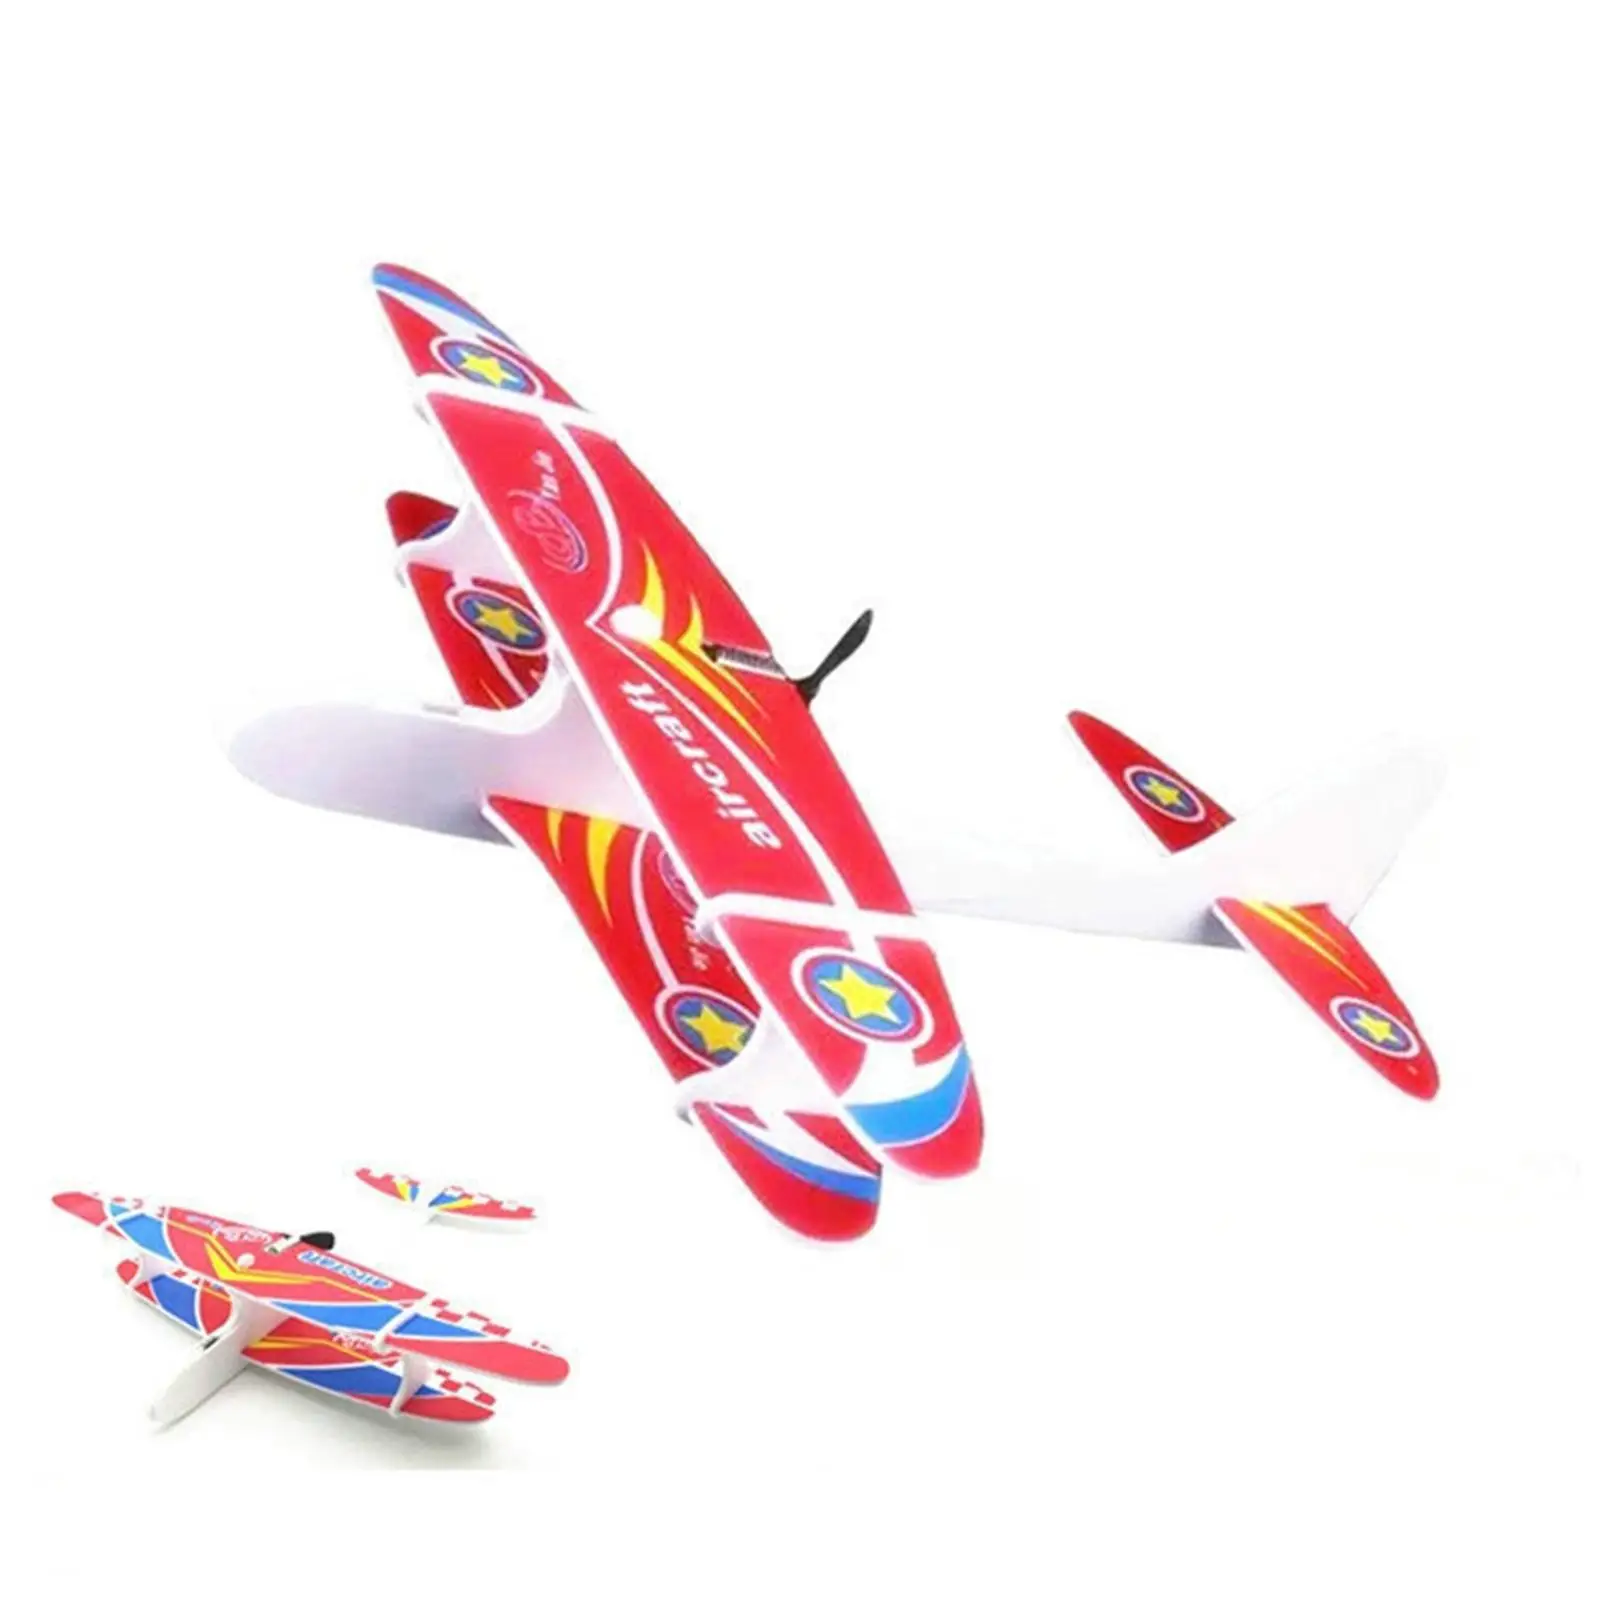 Electric Foam Aircraft Outdoor Sport game toy Lightweight Electric Hand Throwing Glider Plane for Outdoor Toy Birthday Gifts